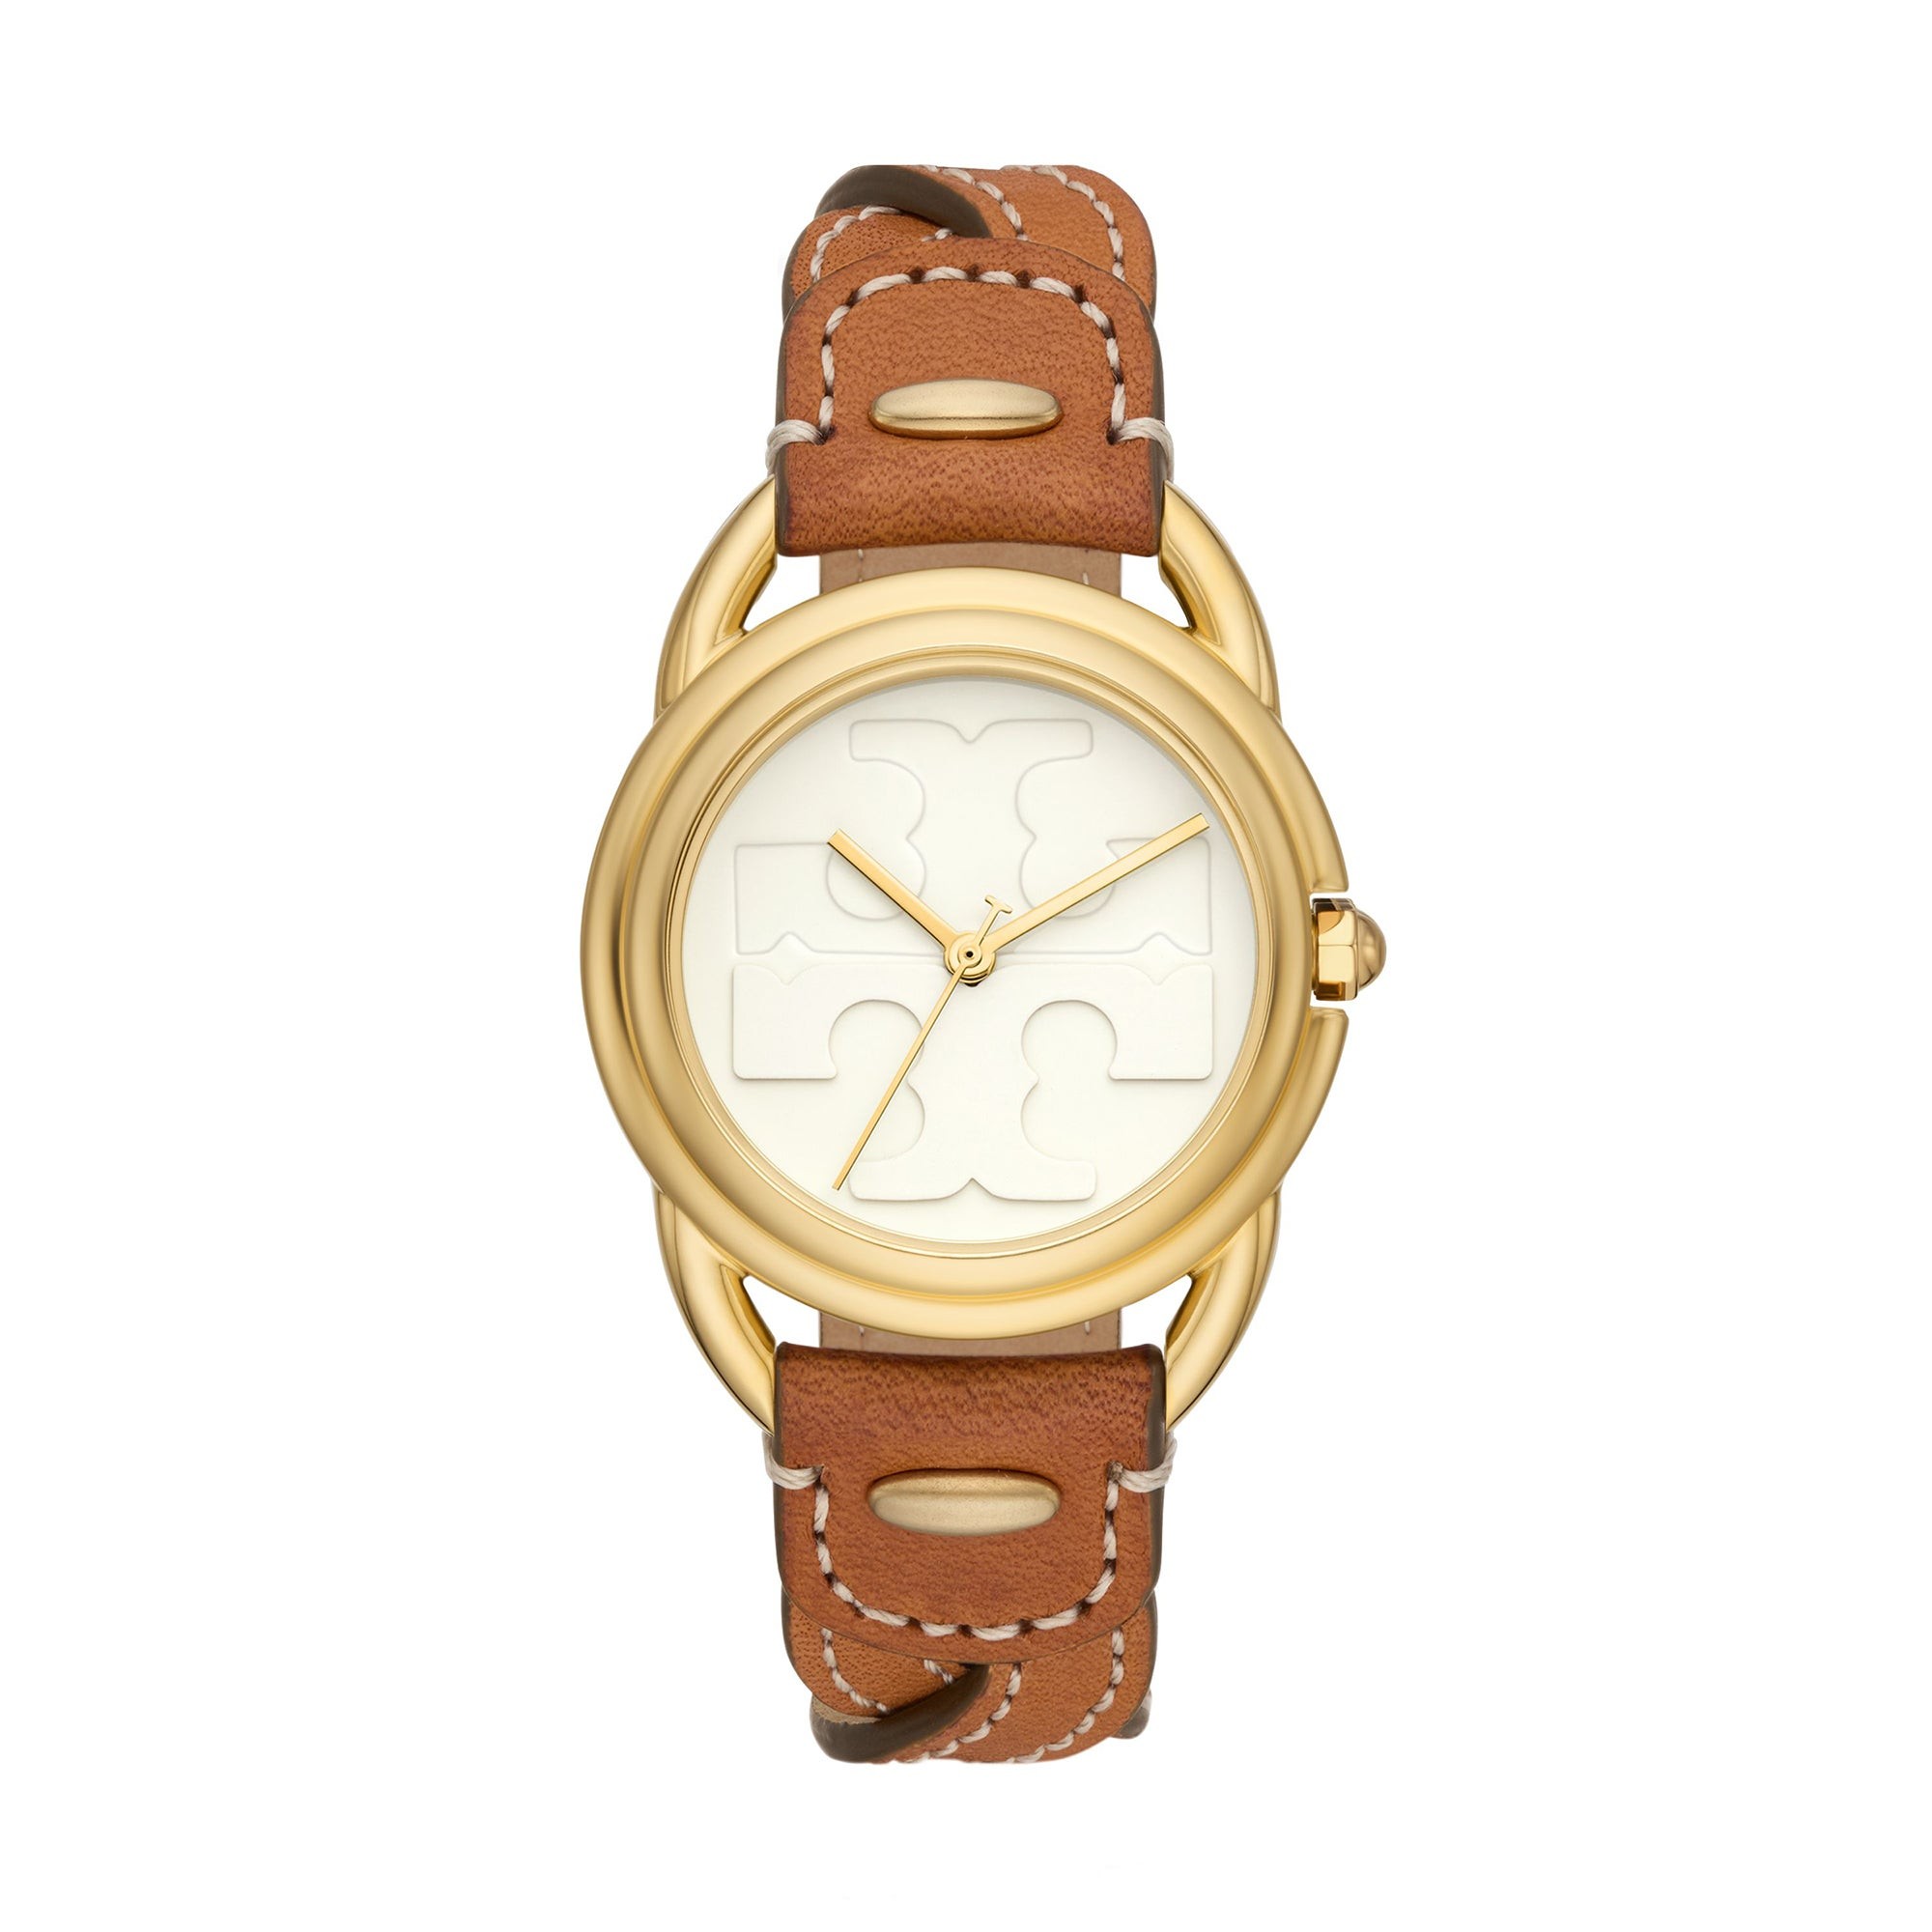 Ladies' Miller Gold & Brown Braided Leather Strap Watch, Cream Dial